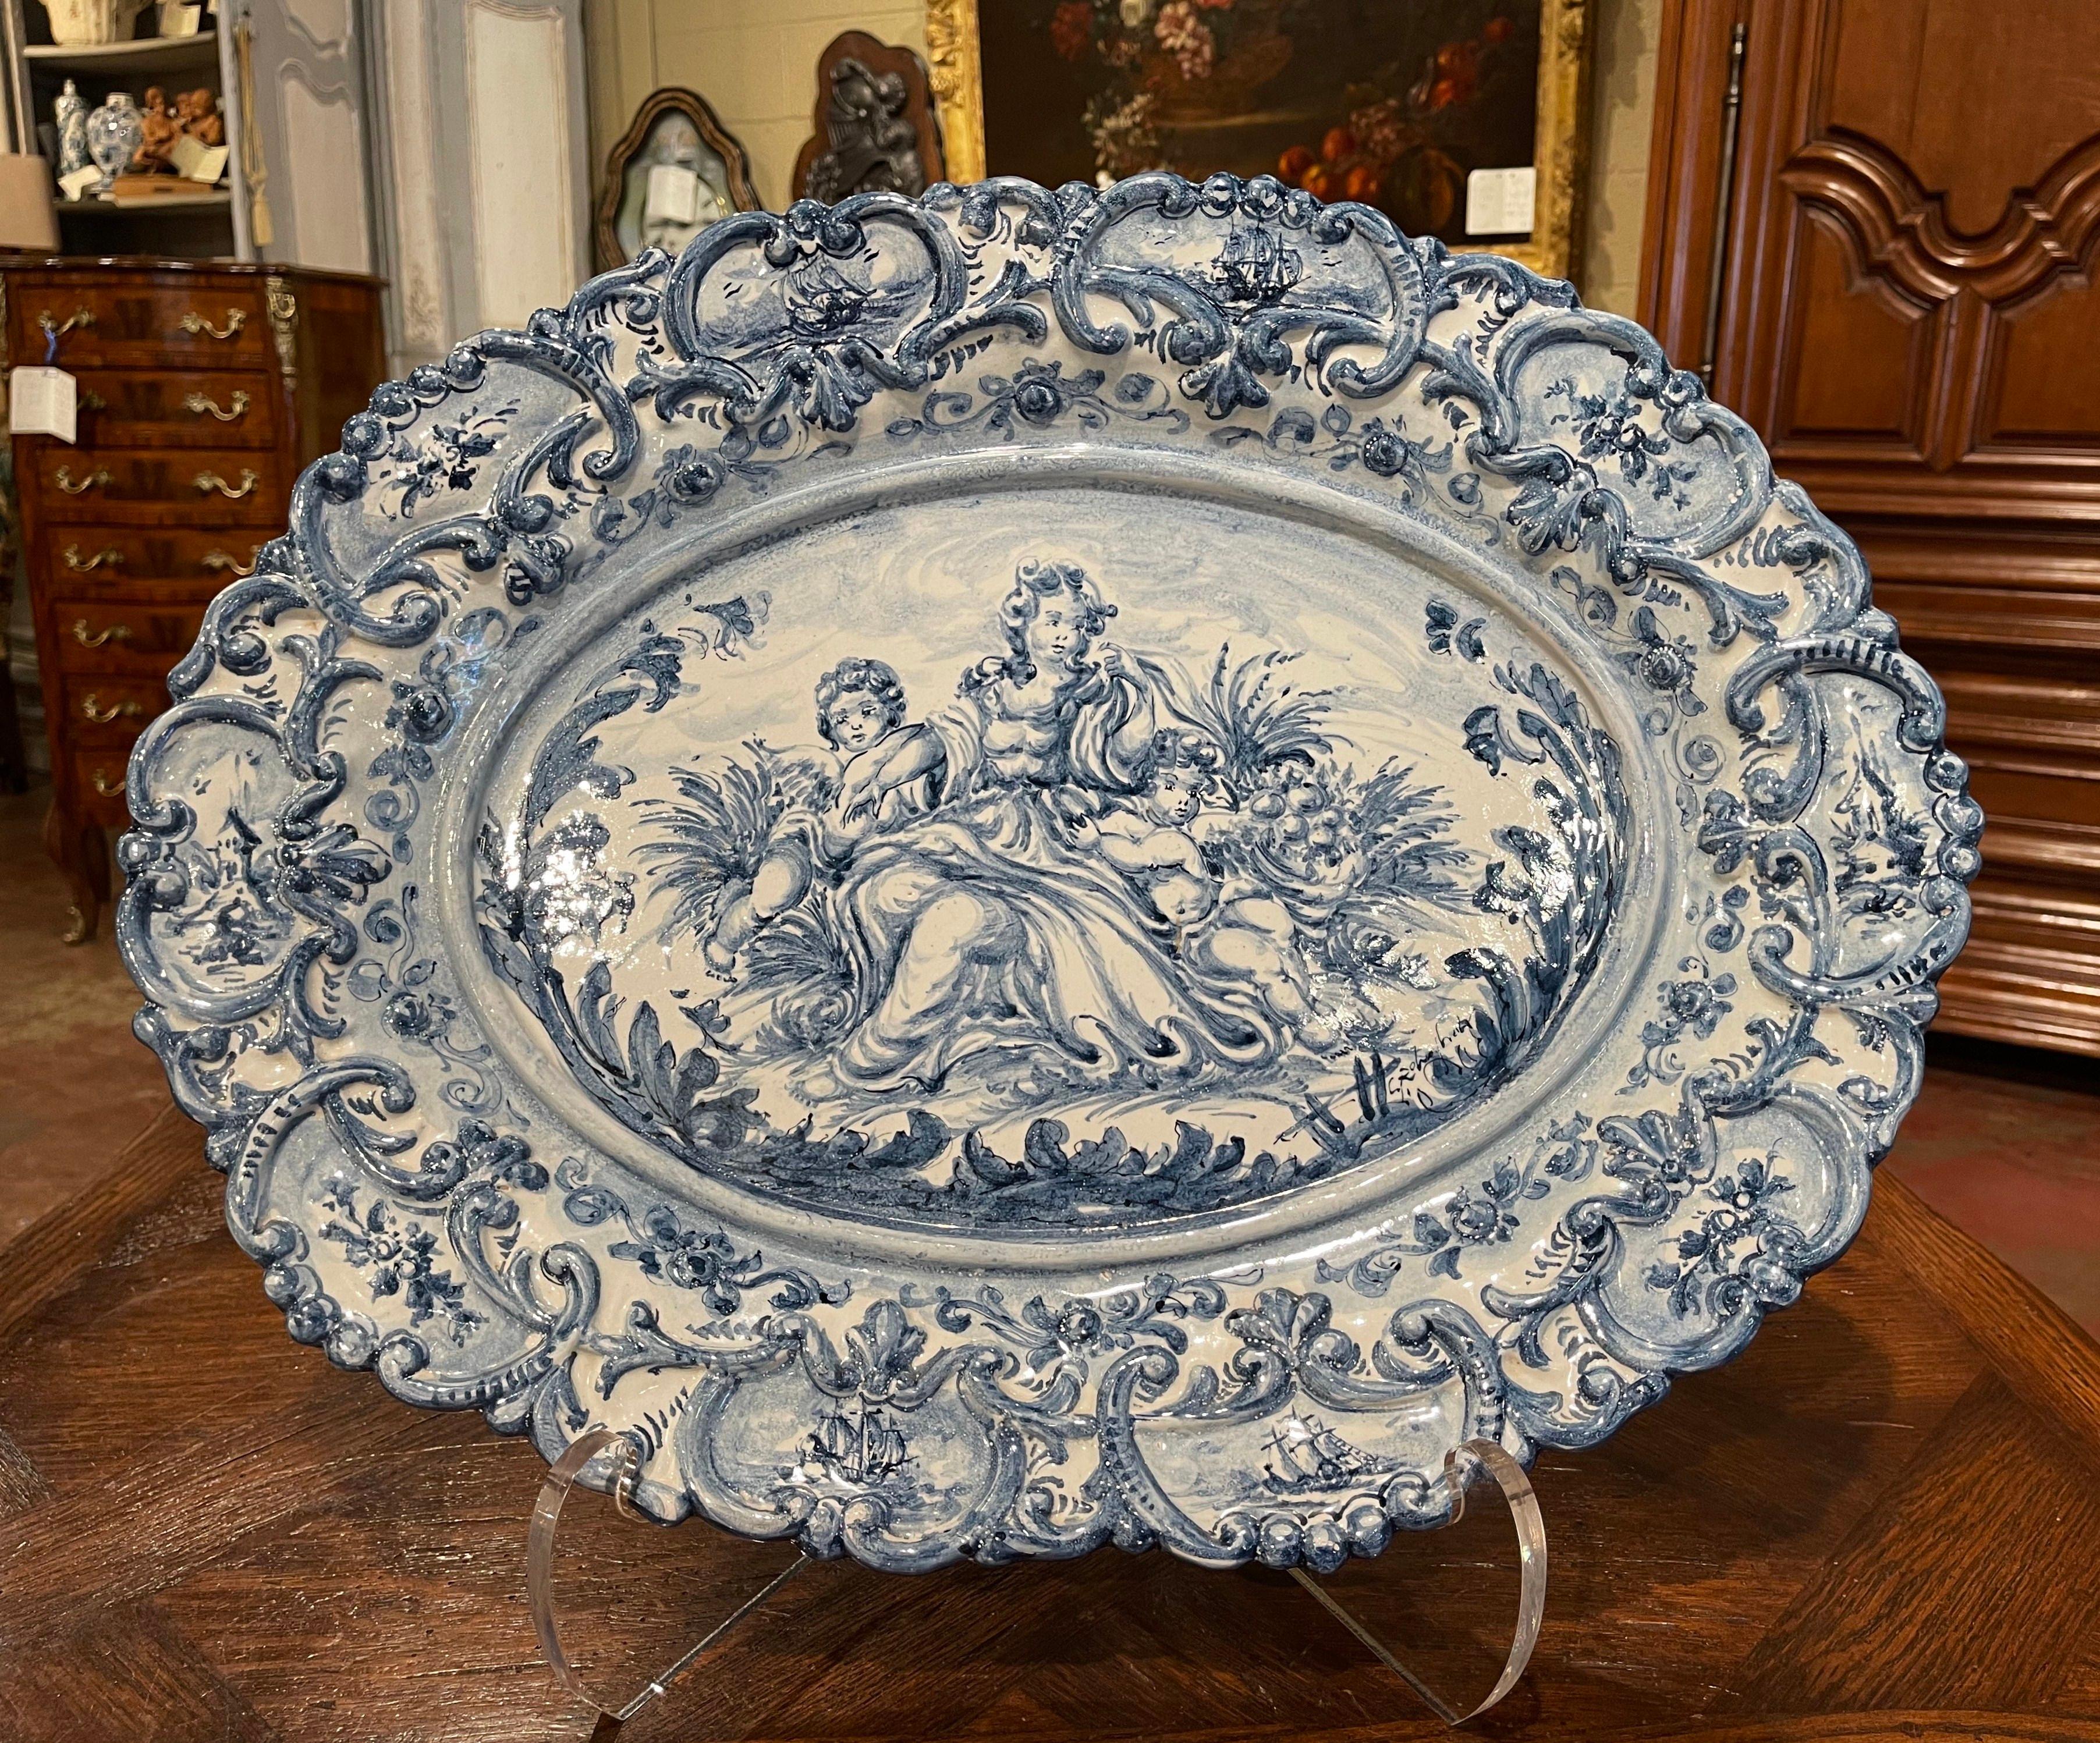 20th Century Mid-Century Italian Hand Painted Blue and White Faience Wall Platter Delft Style